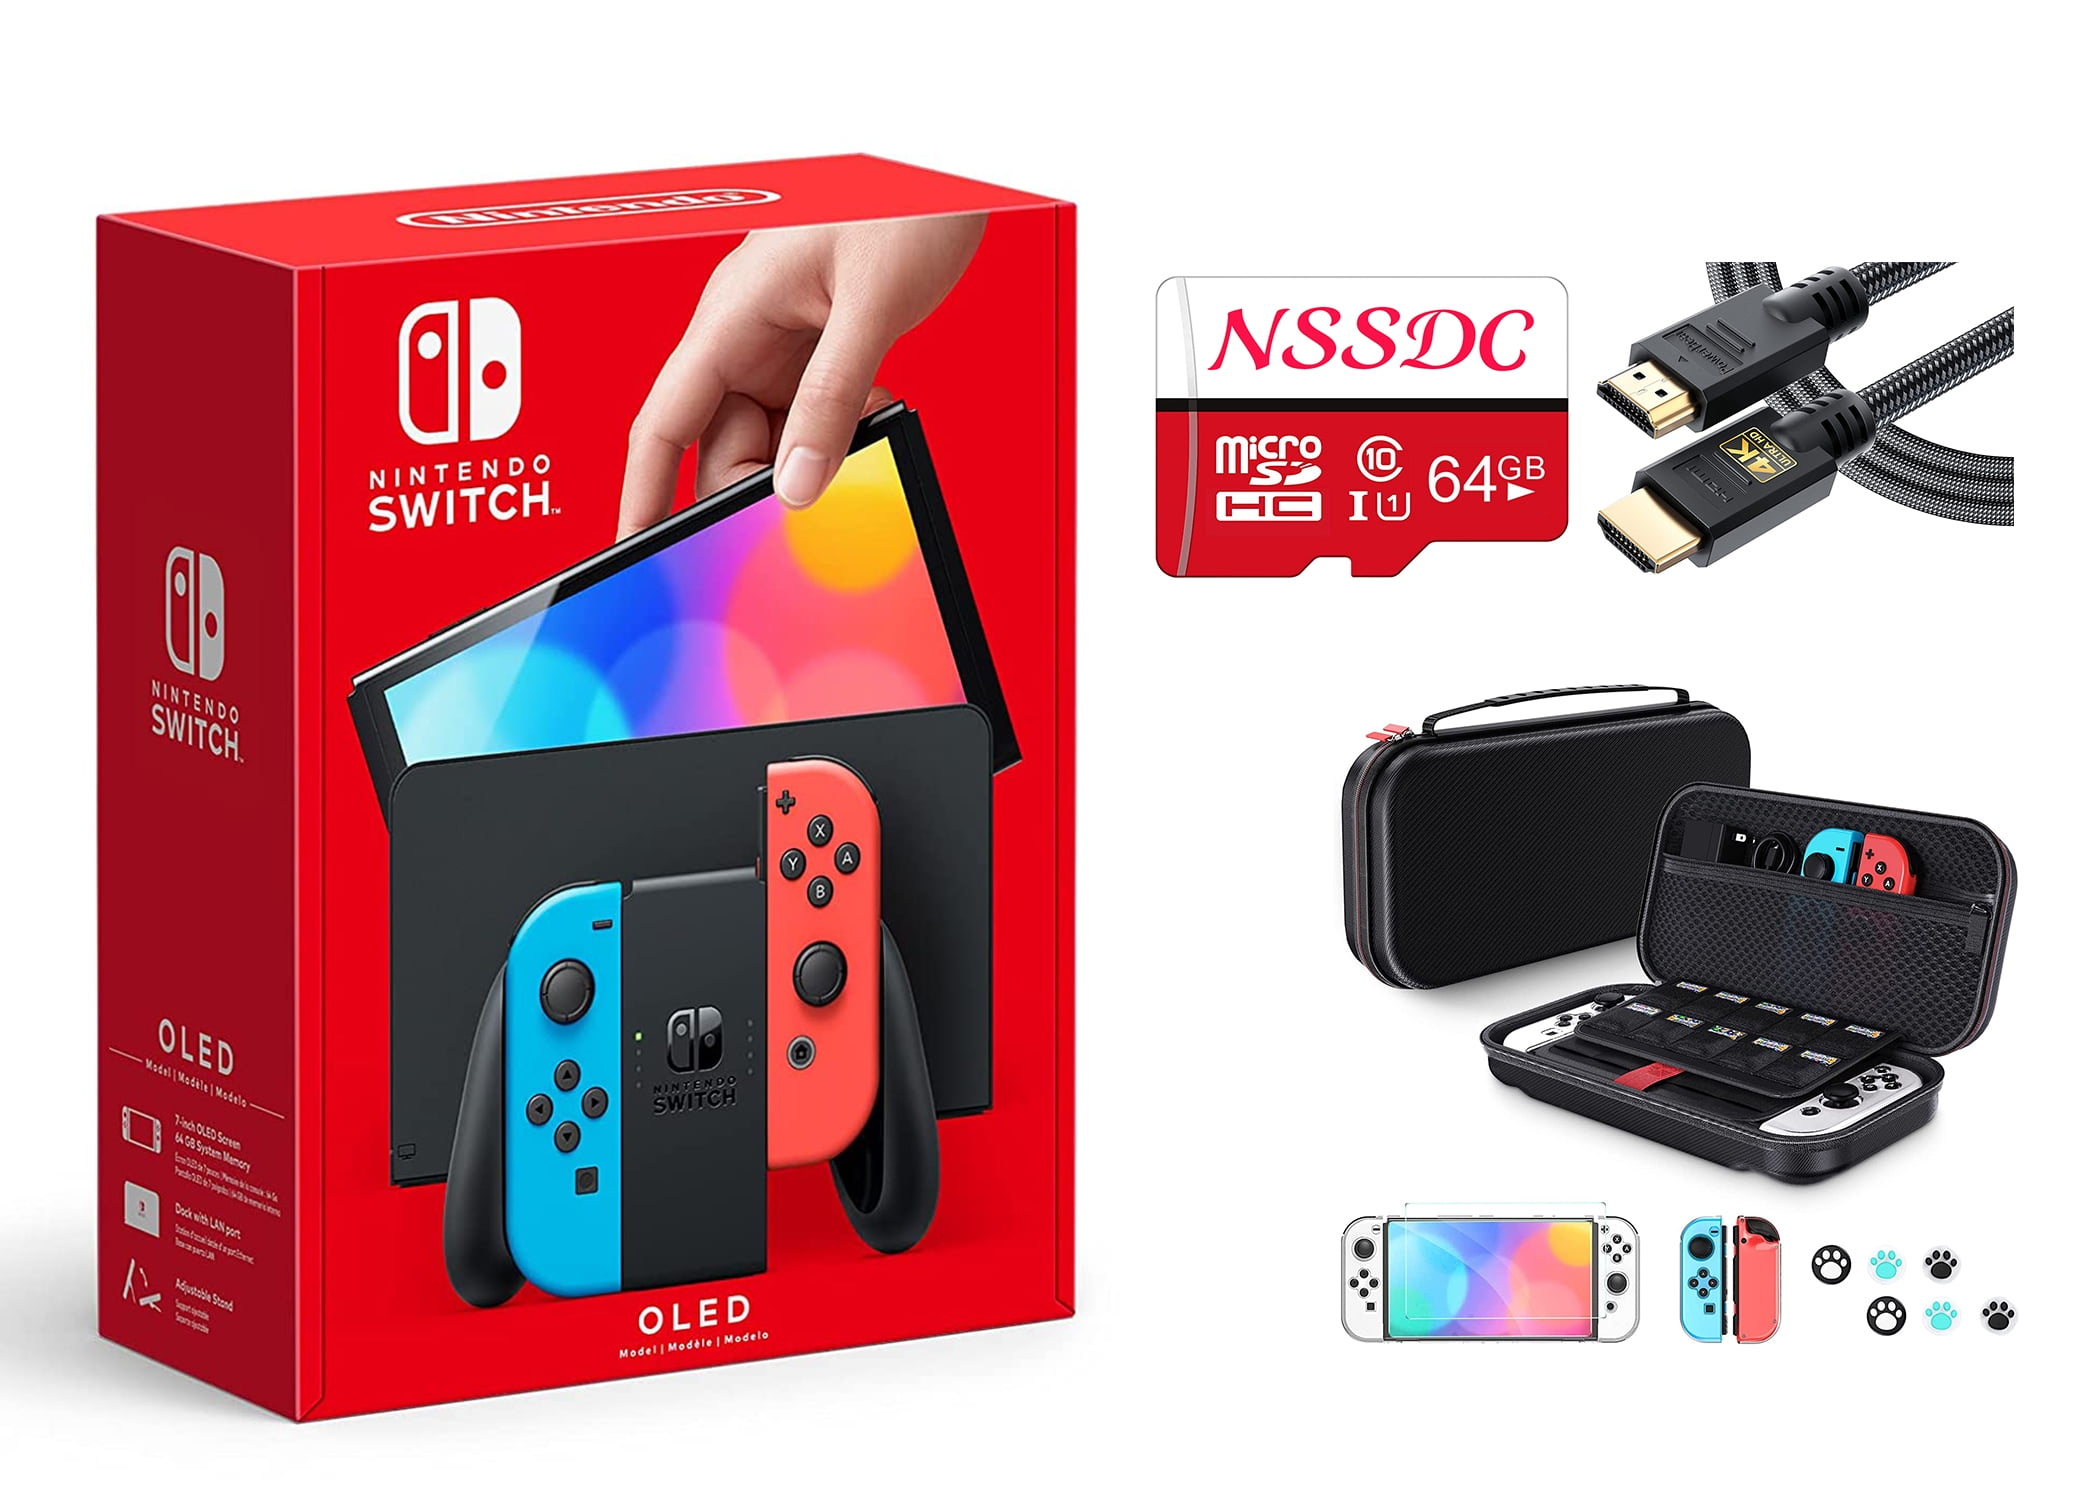 Newest Nintendo Switch Oled Neon Joy-Con Console With NSSDC 256gb Storage  Card, 10 in 1 Case and High Sped HDMI Bundl